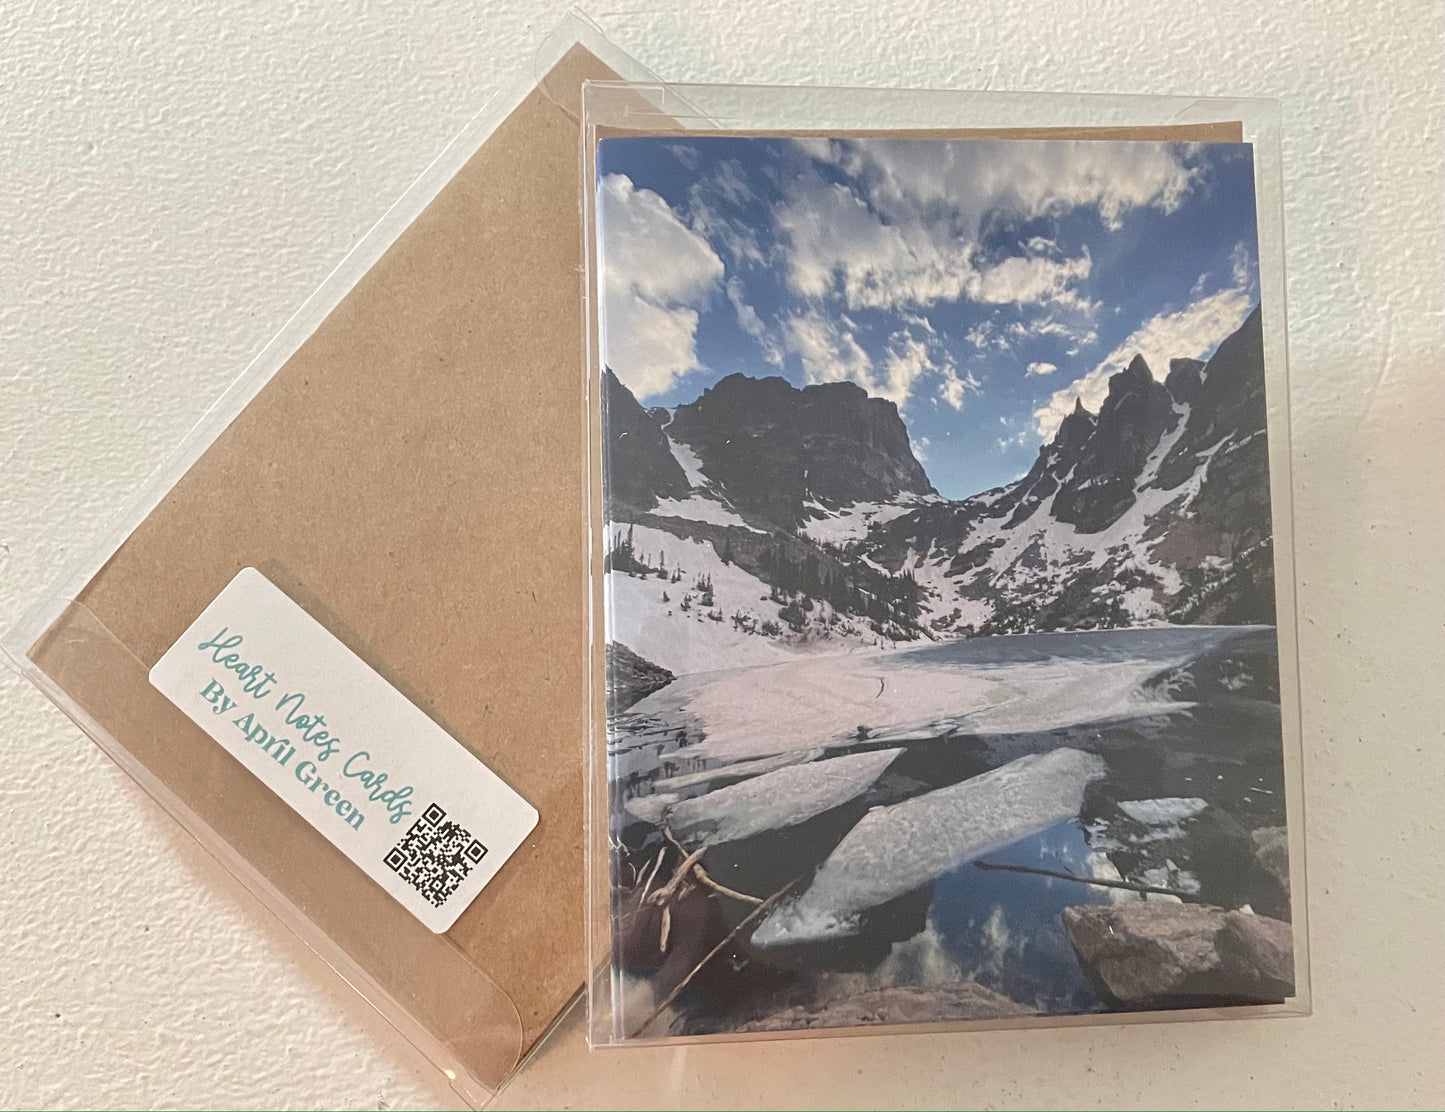 Emerald Lake Rocky Mountain National Park Single Original Photography Greeting Card with Envelope